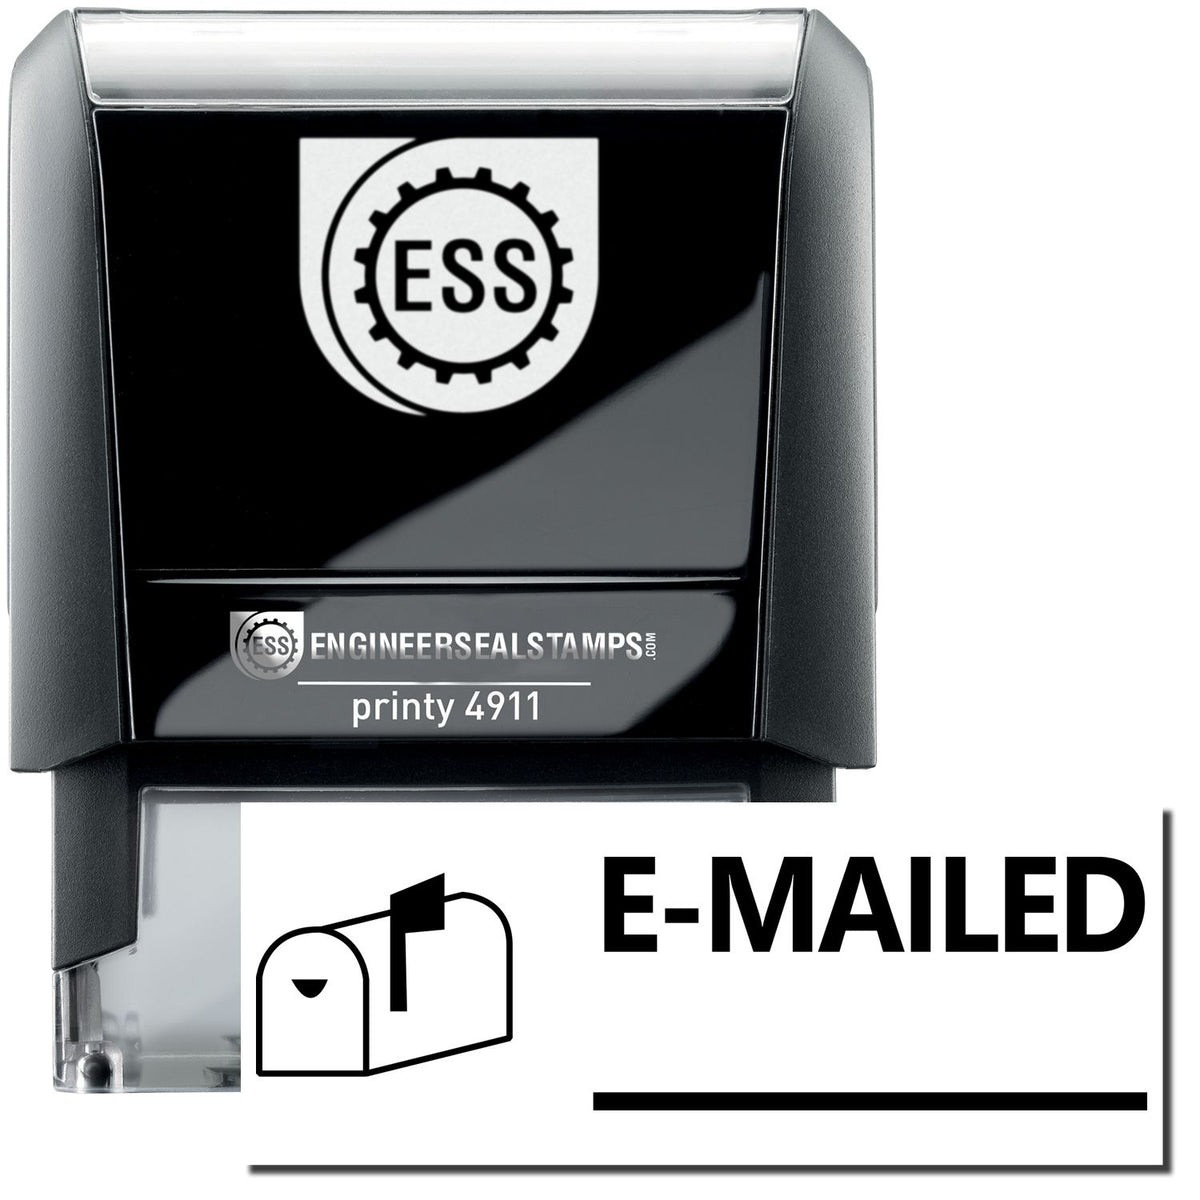 A self-inking stamp with a stamped image showing how the text &quot;E-MAILED&quot; (with an image of a mailbox with the flag up and includes a line under the text) is displayed after stamping.